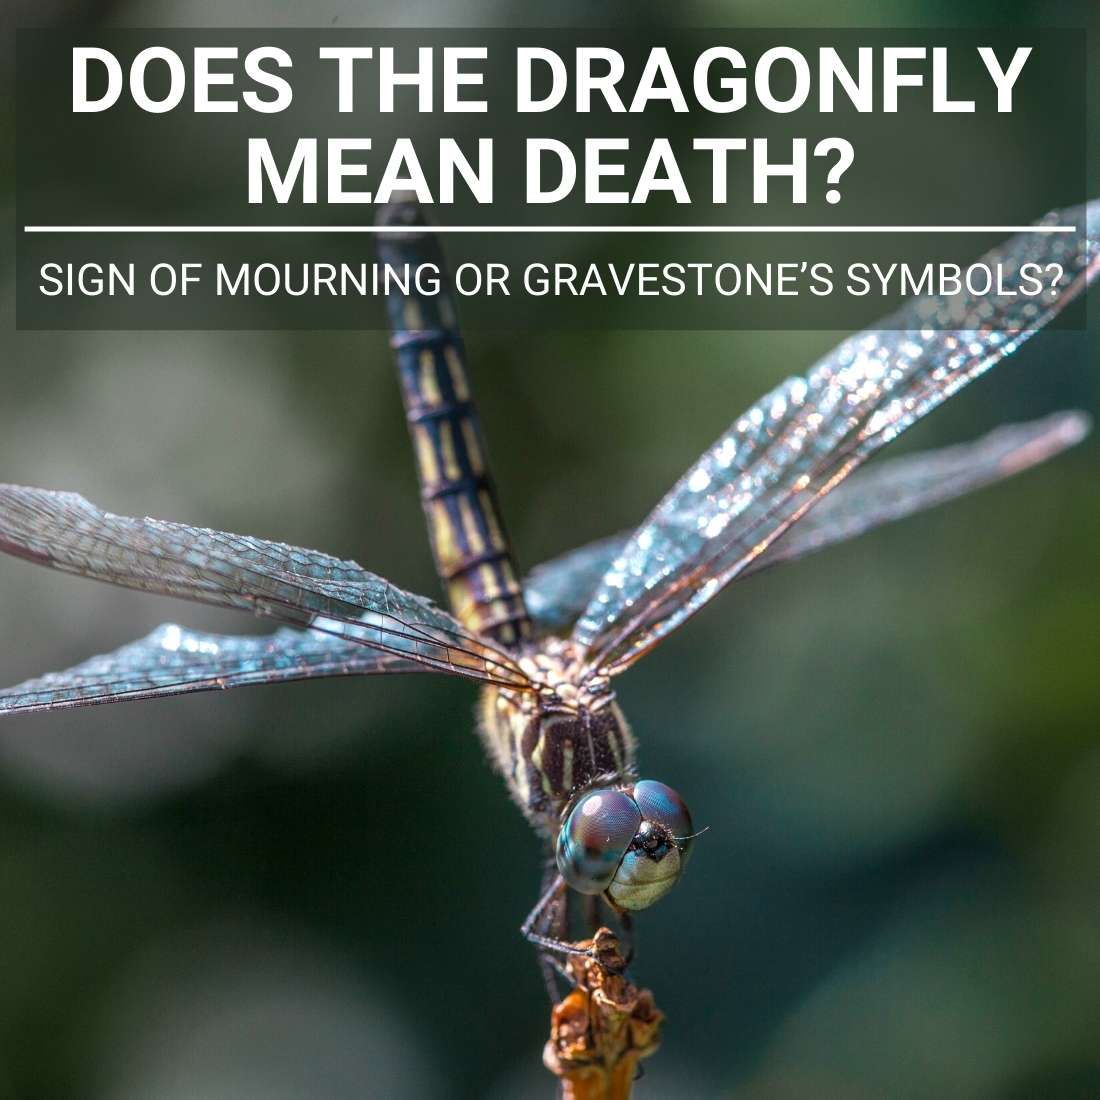 Does dragonfly mean death